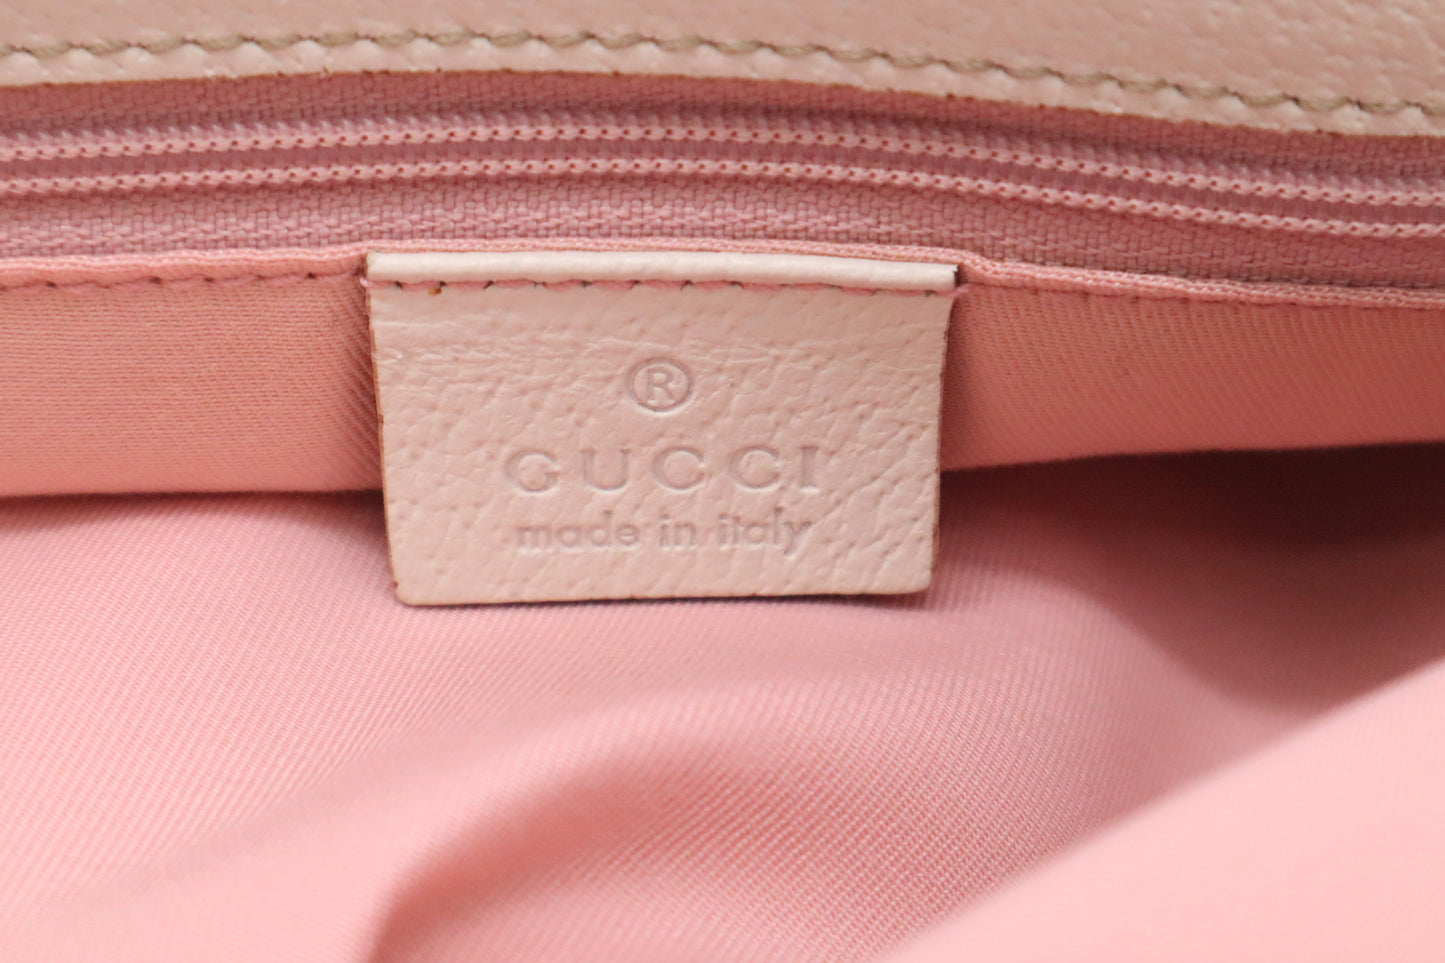 Gucci Tote Bag in Pink GG Canvas